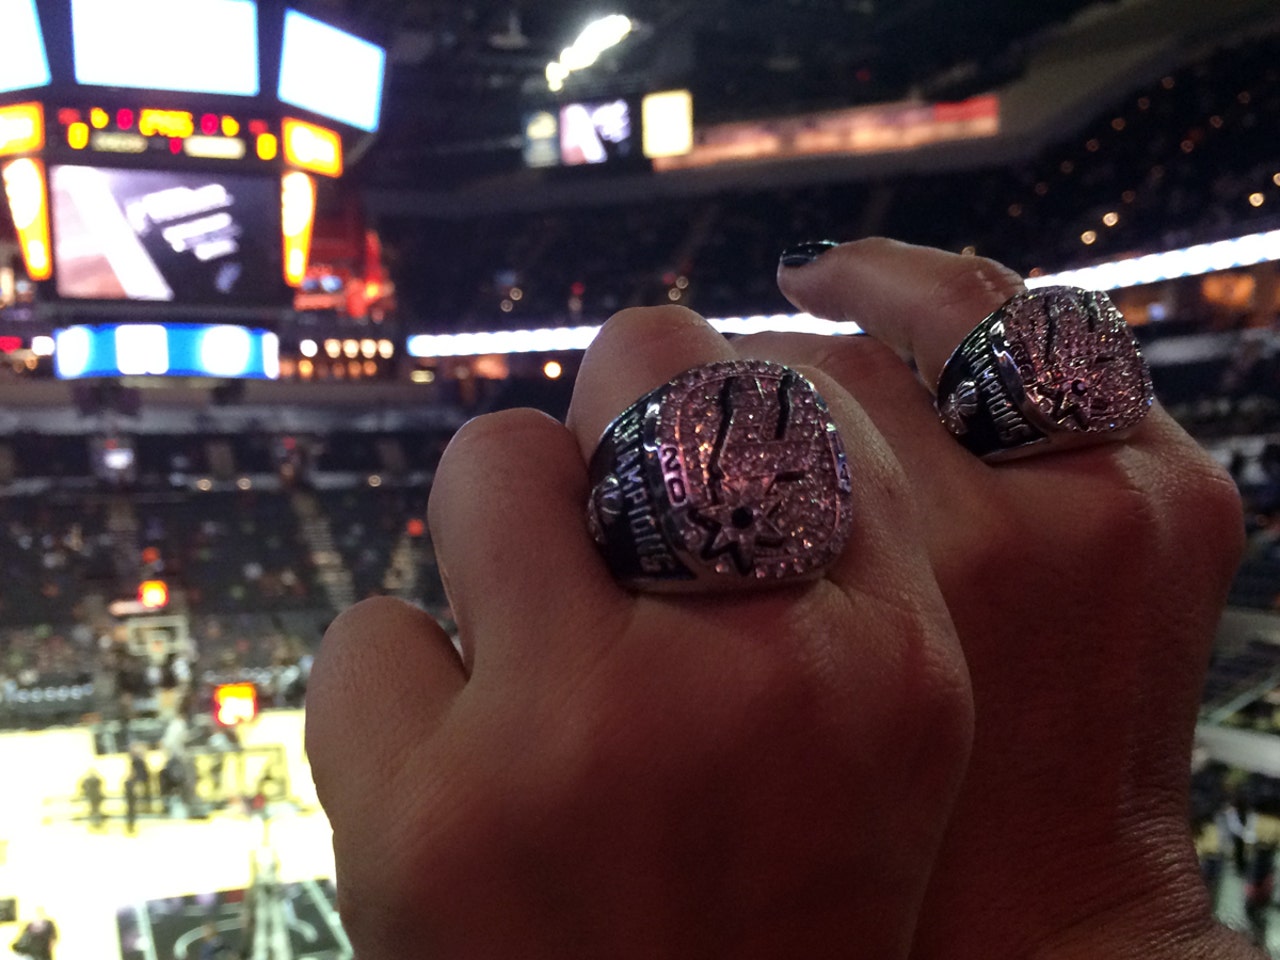 Spurs to Give Away Commemorative Championship Rings on Opening Night  Courtesy of H-E-B and BBVA Compass